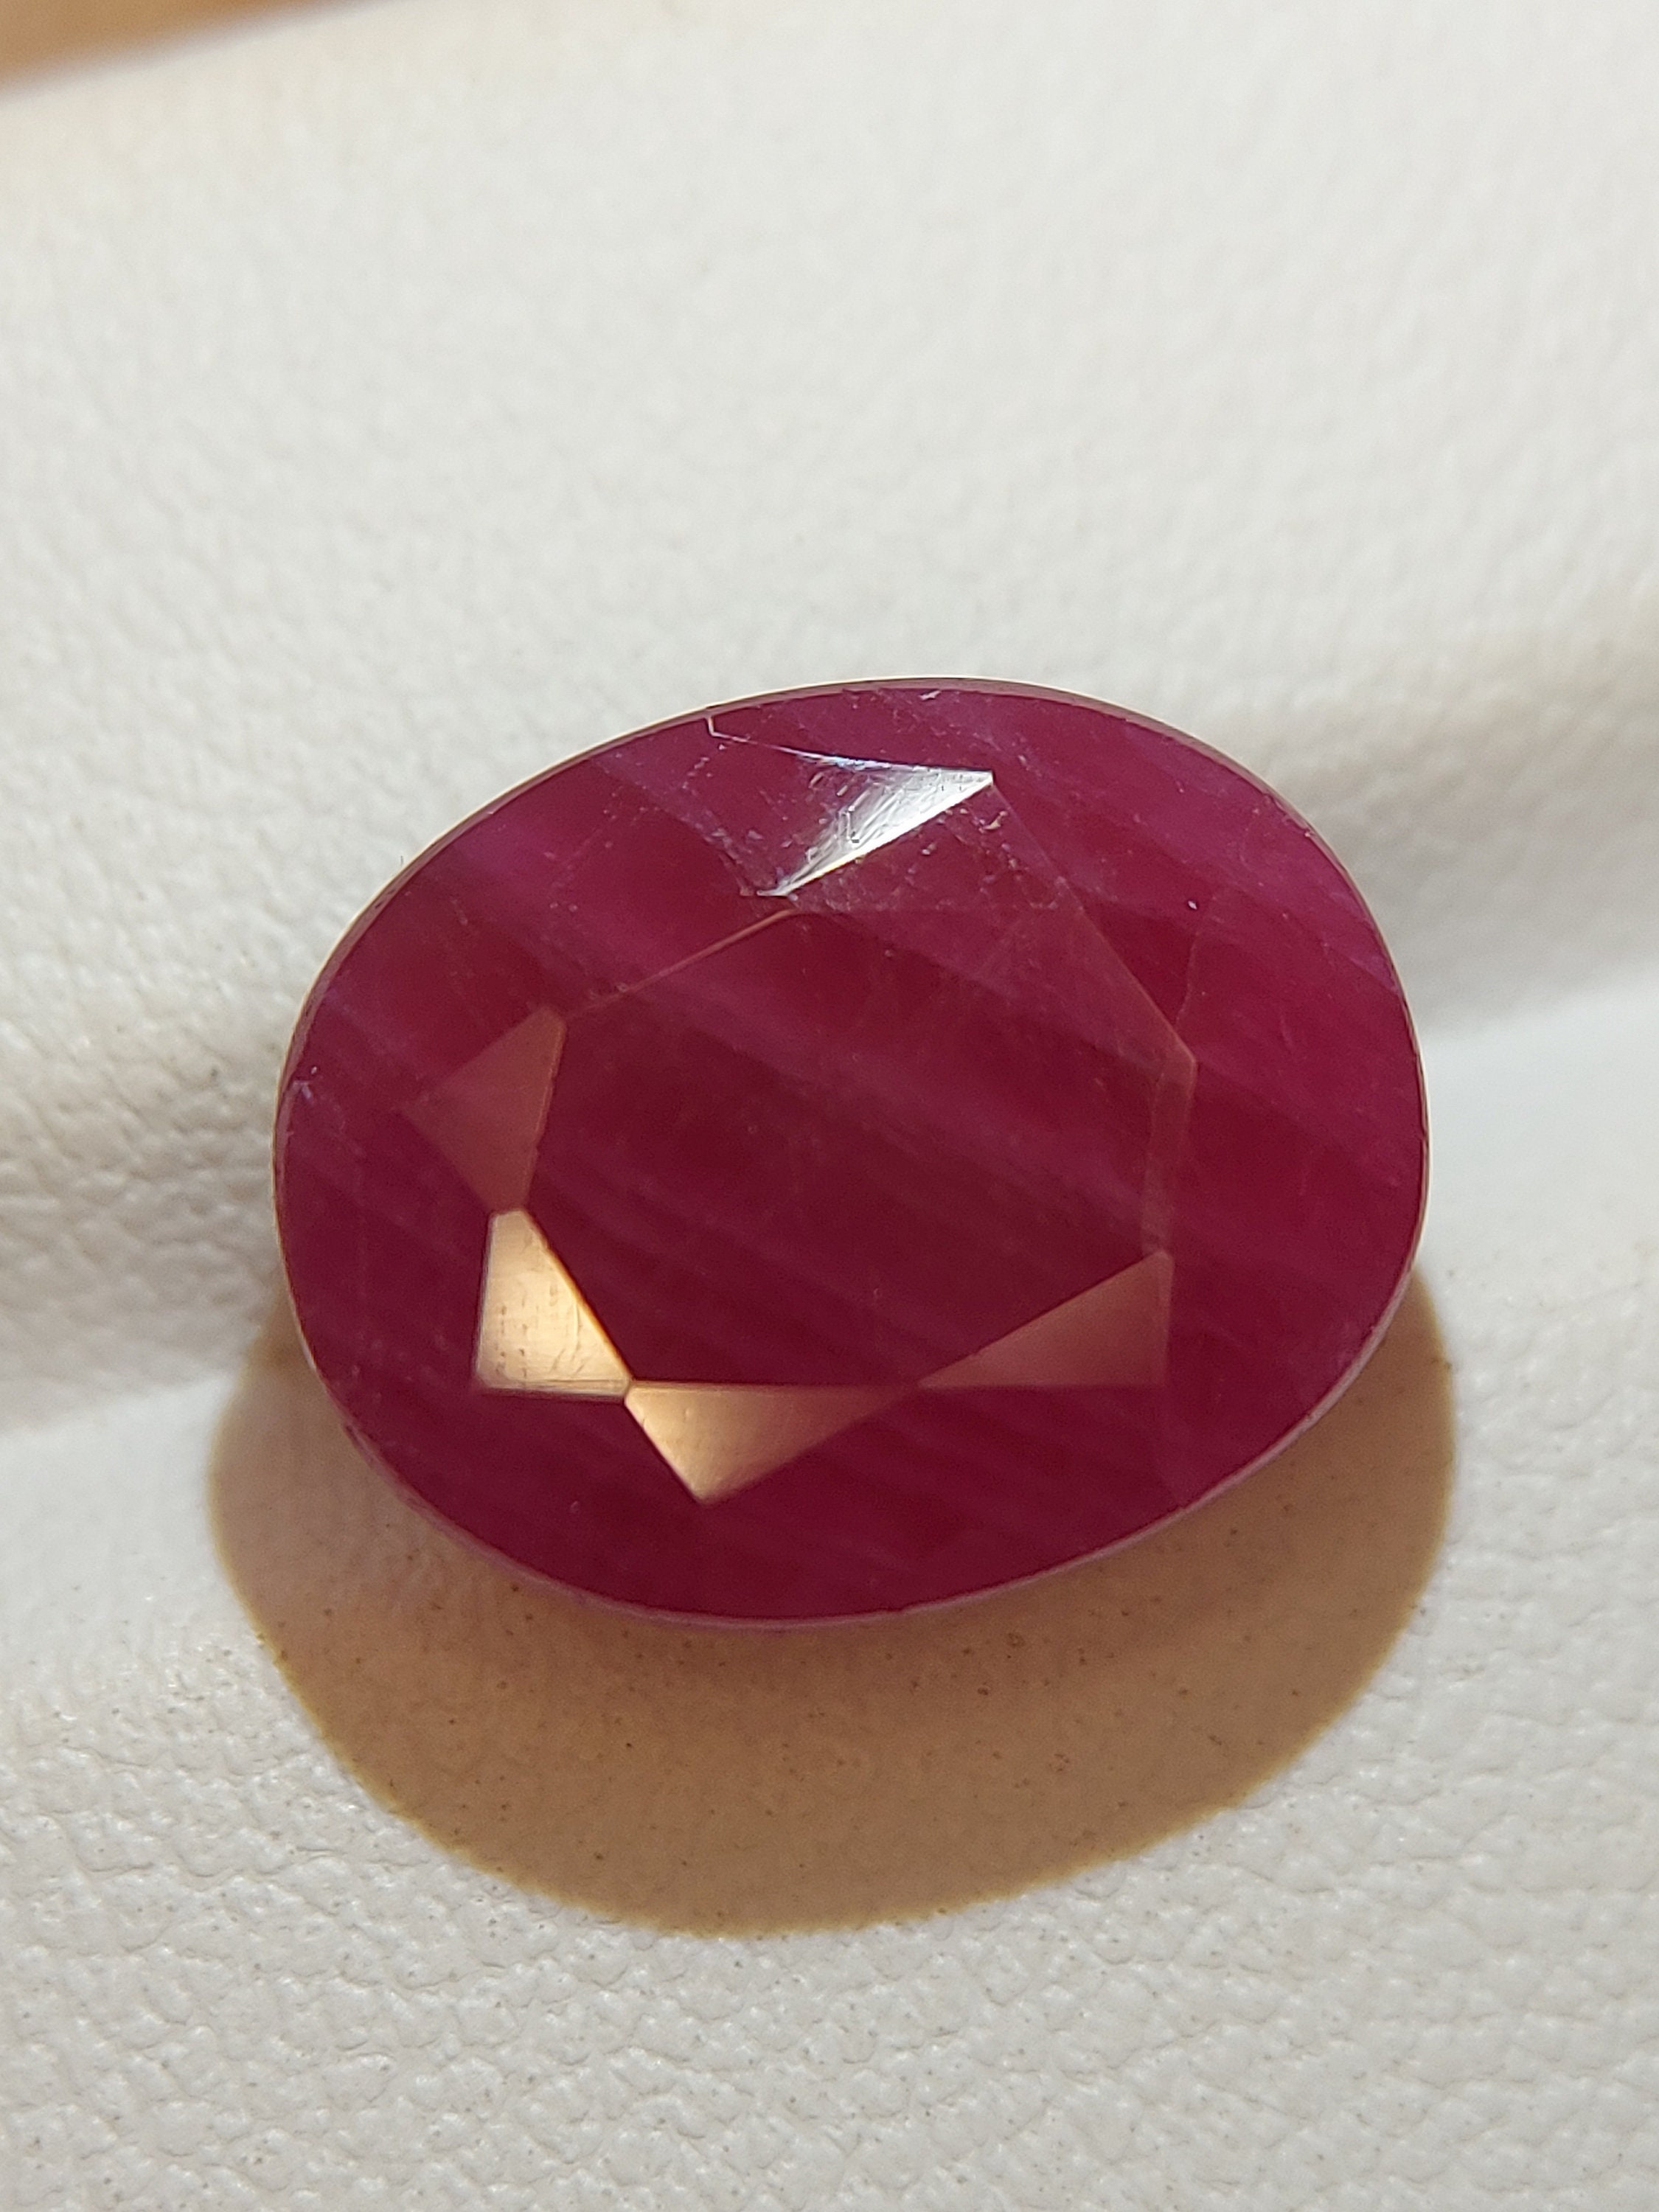 Top 10 July Birthstones: the Ruby, King of Precious Red Gems